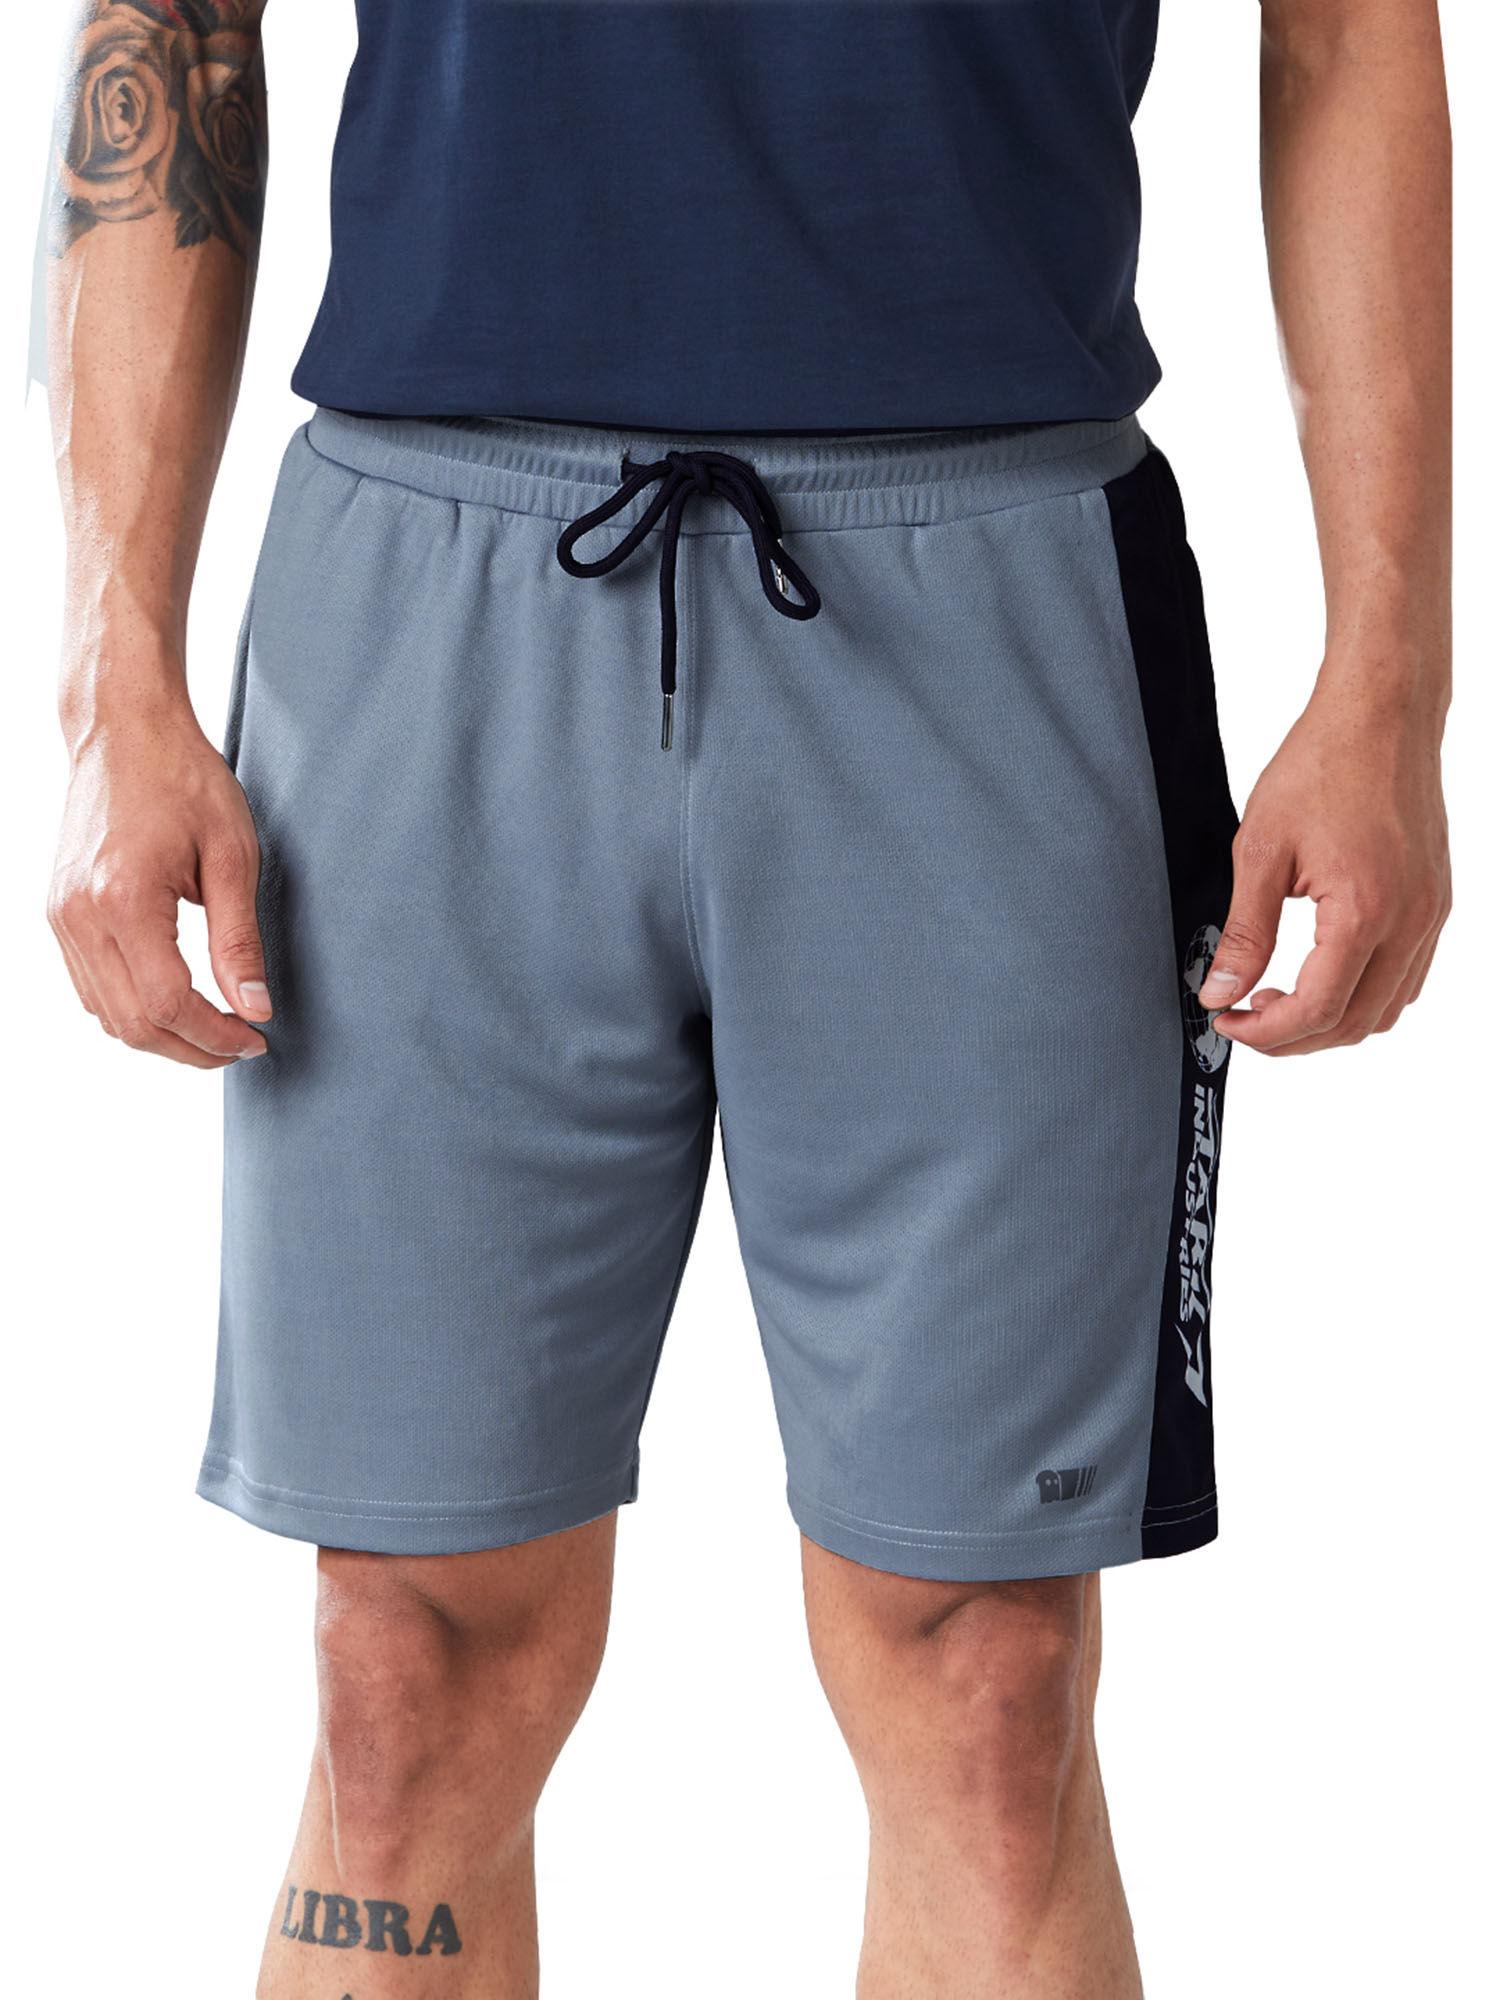 official iron man stark industries performance shorts for men